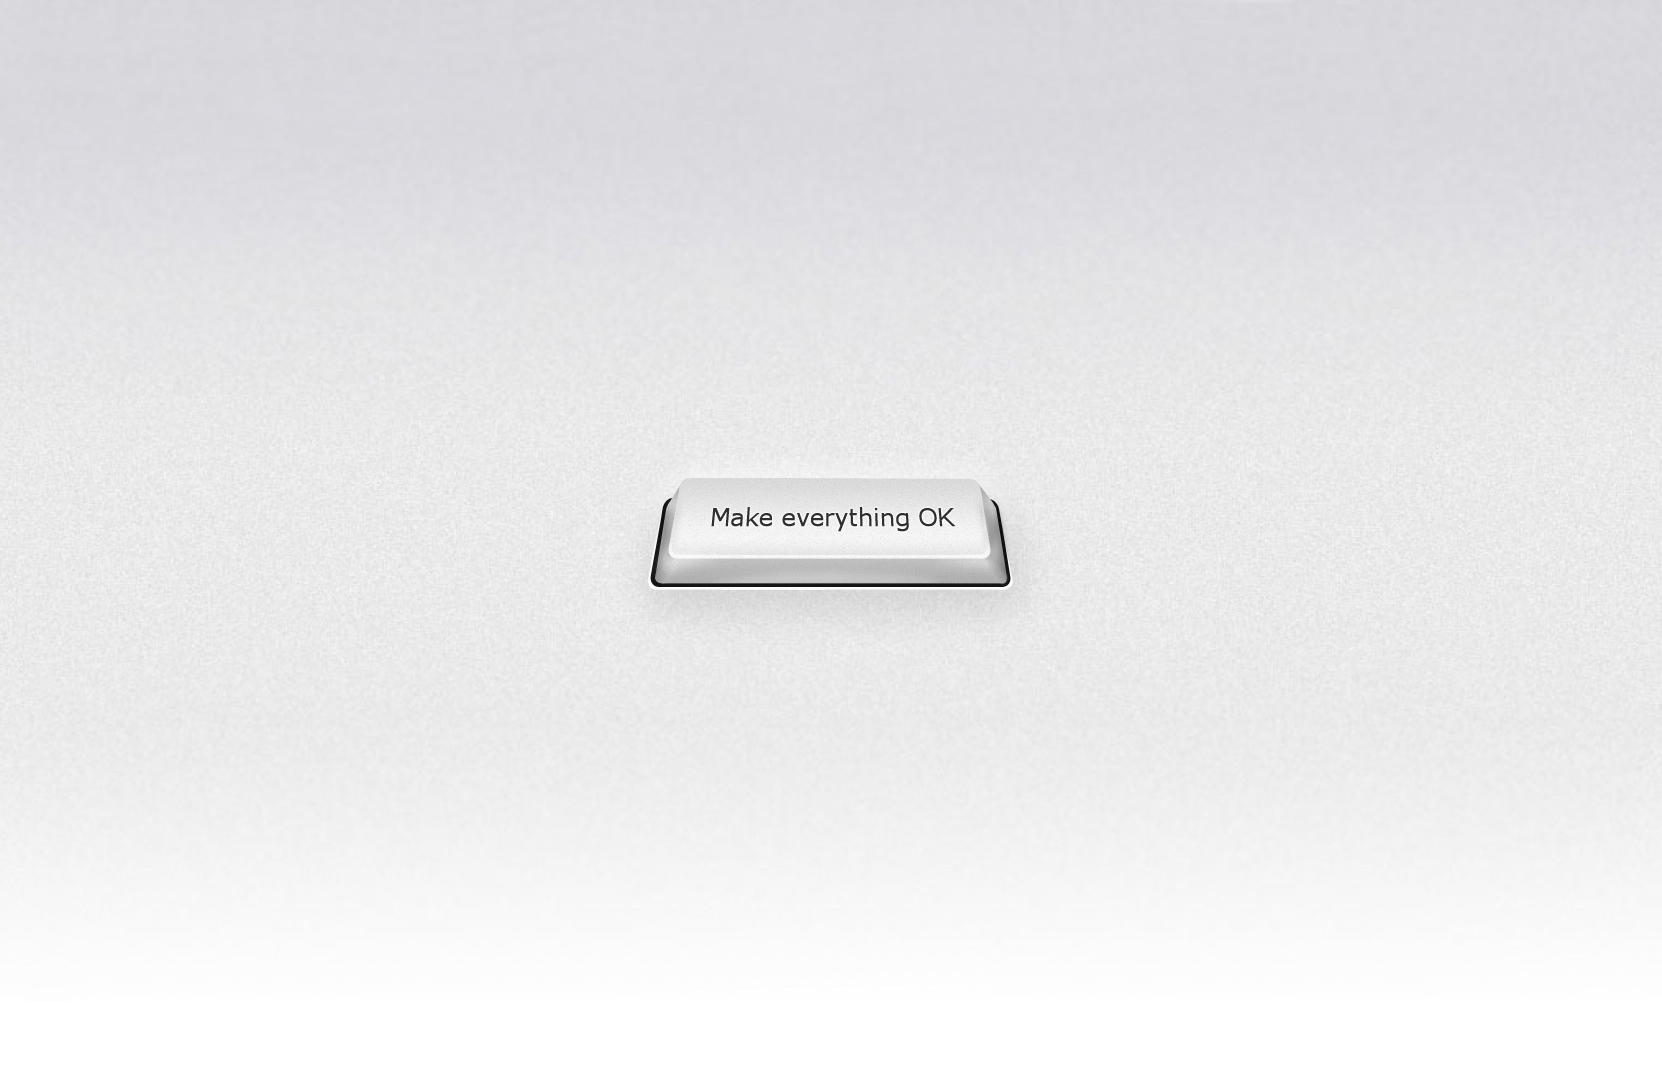 The make everything ok button!